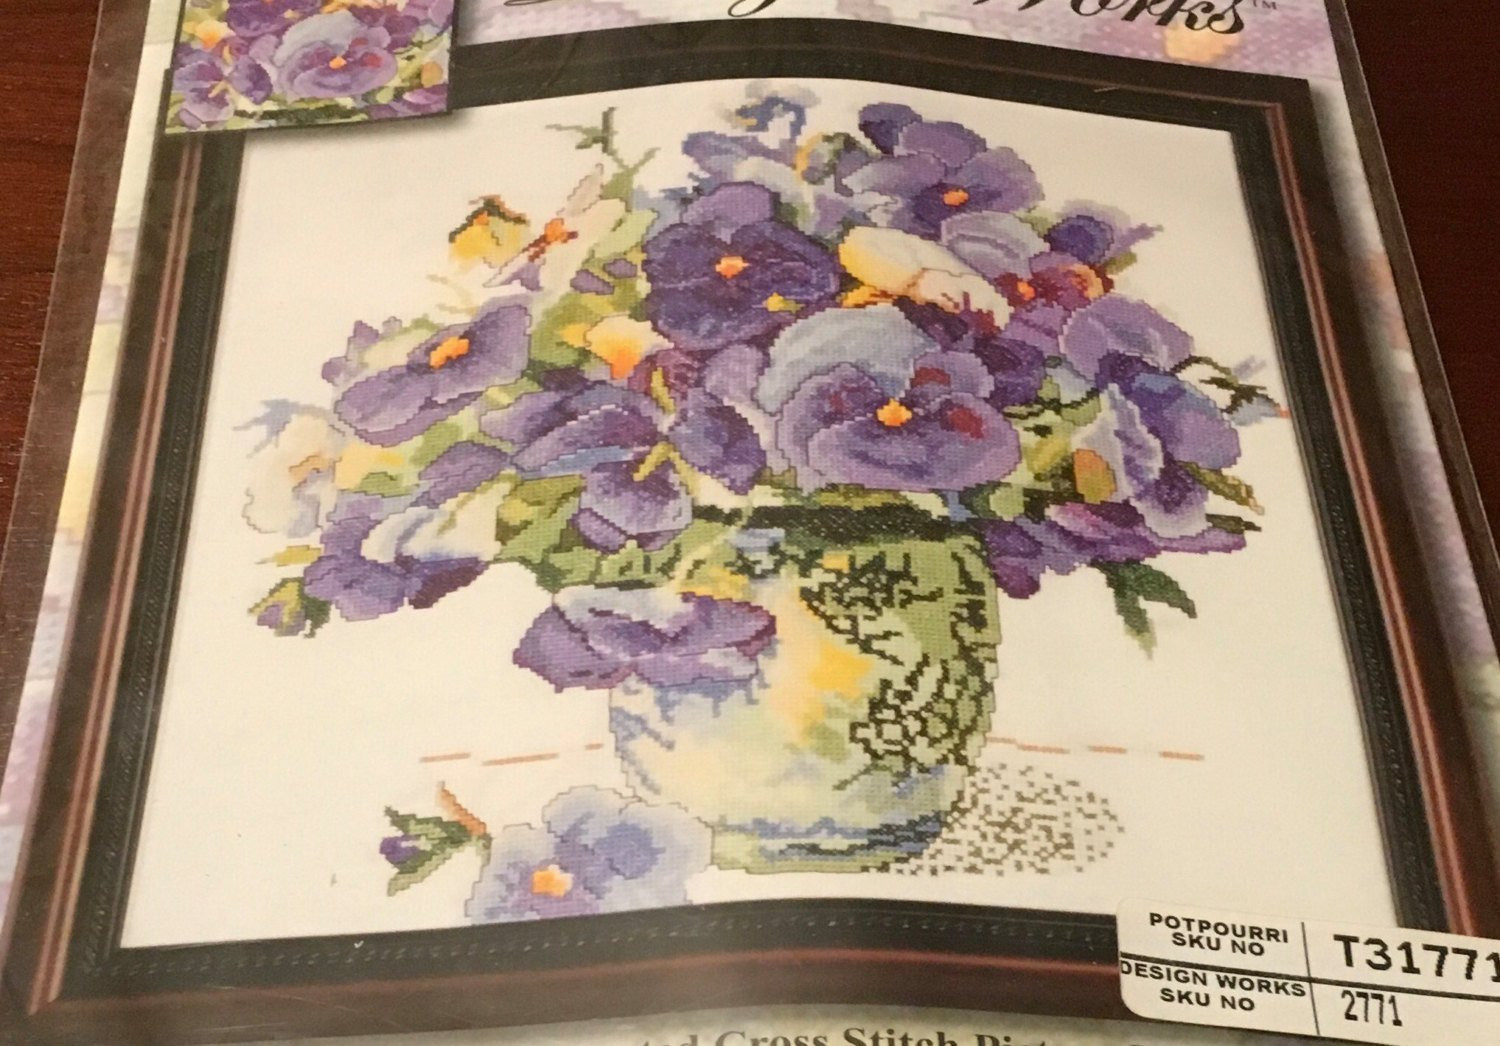 23 attractive Pansy Flower Ring Vase 2024 free download pansy flower ring vase of design works 2771 counted cross stitch kit pansy floral flower etsy with regard to dc29fc294c28ezoom